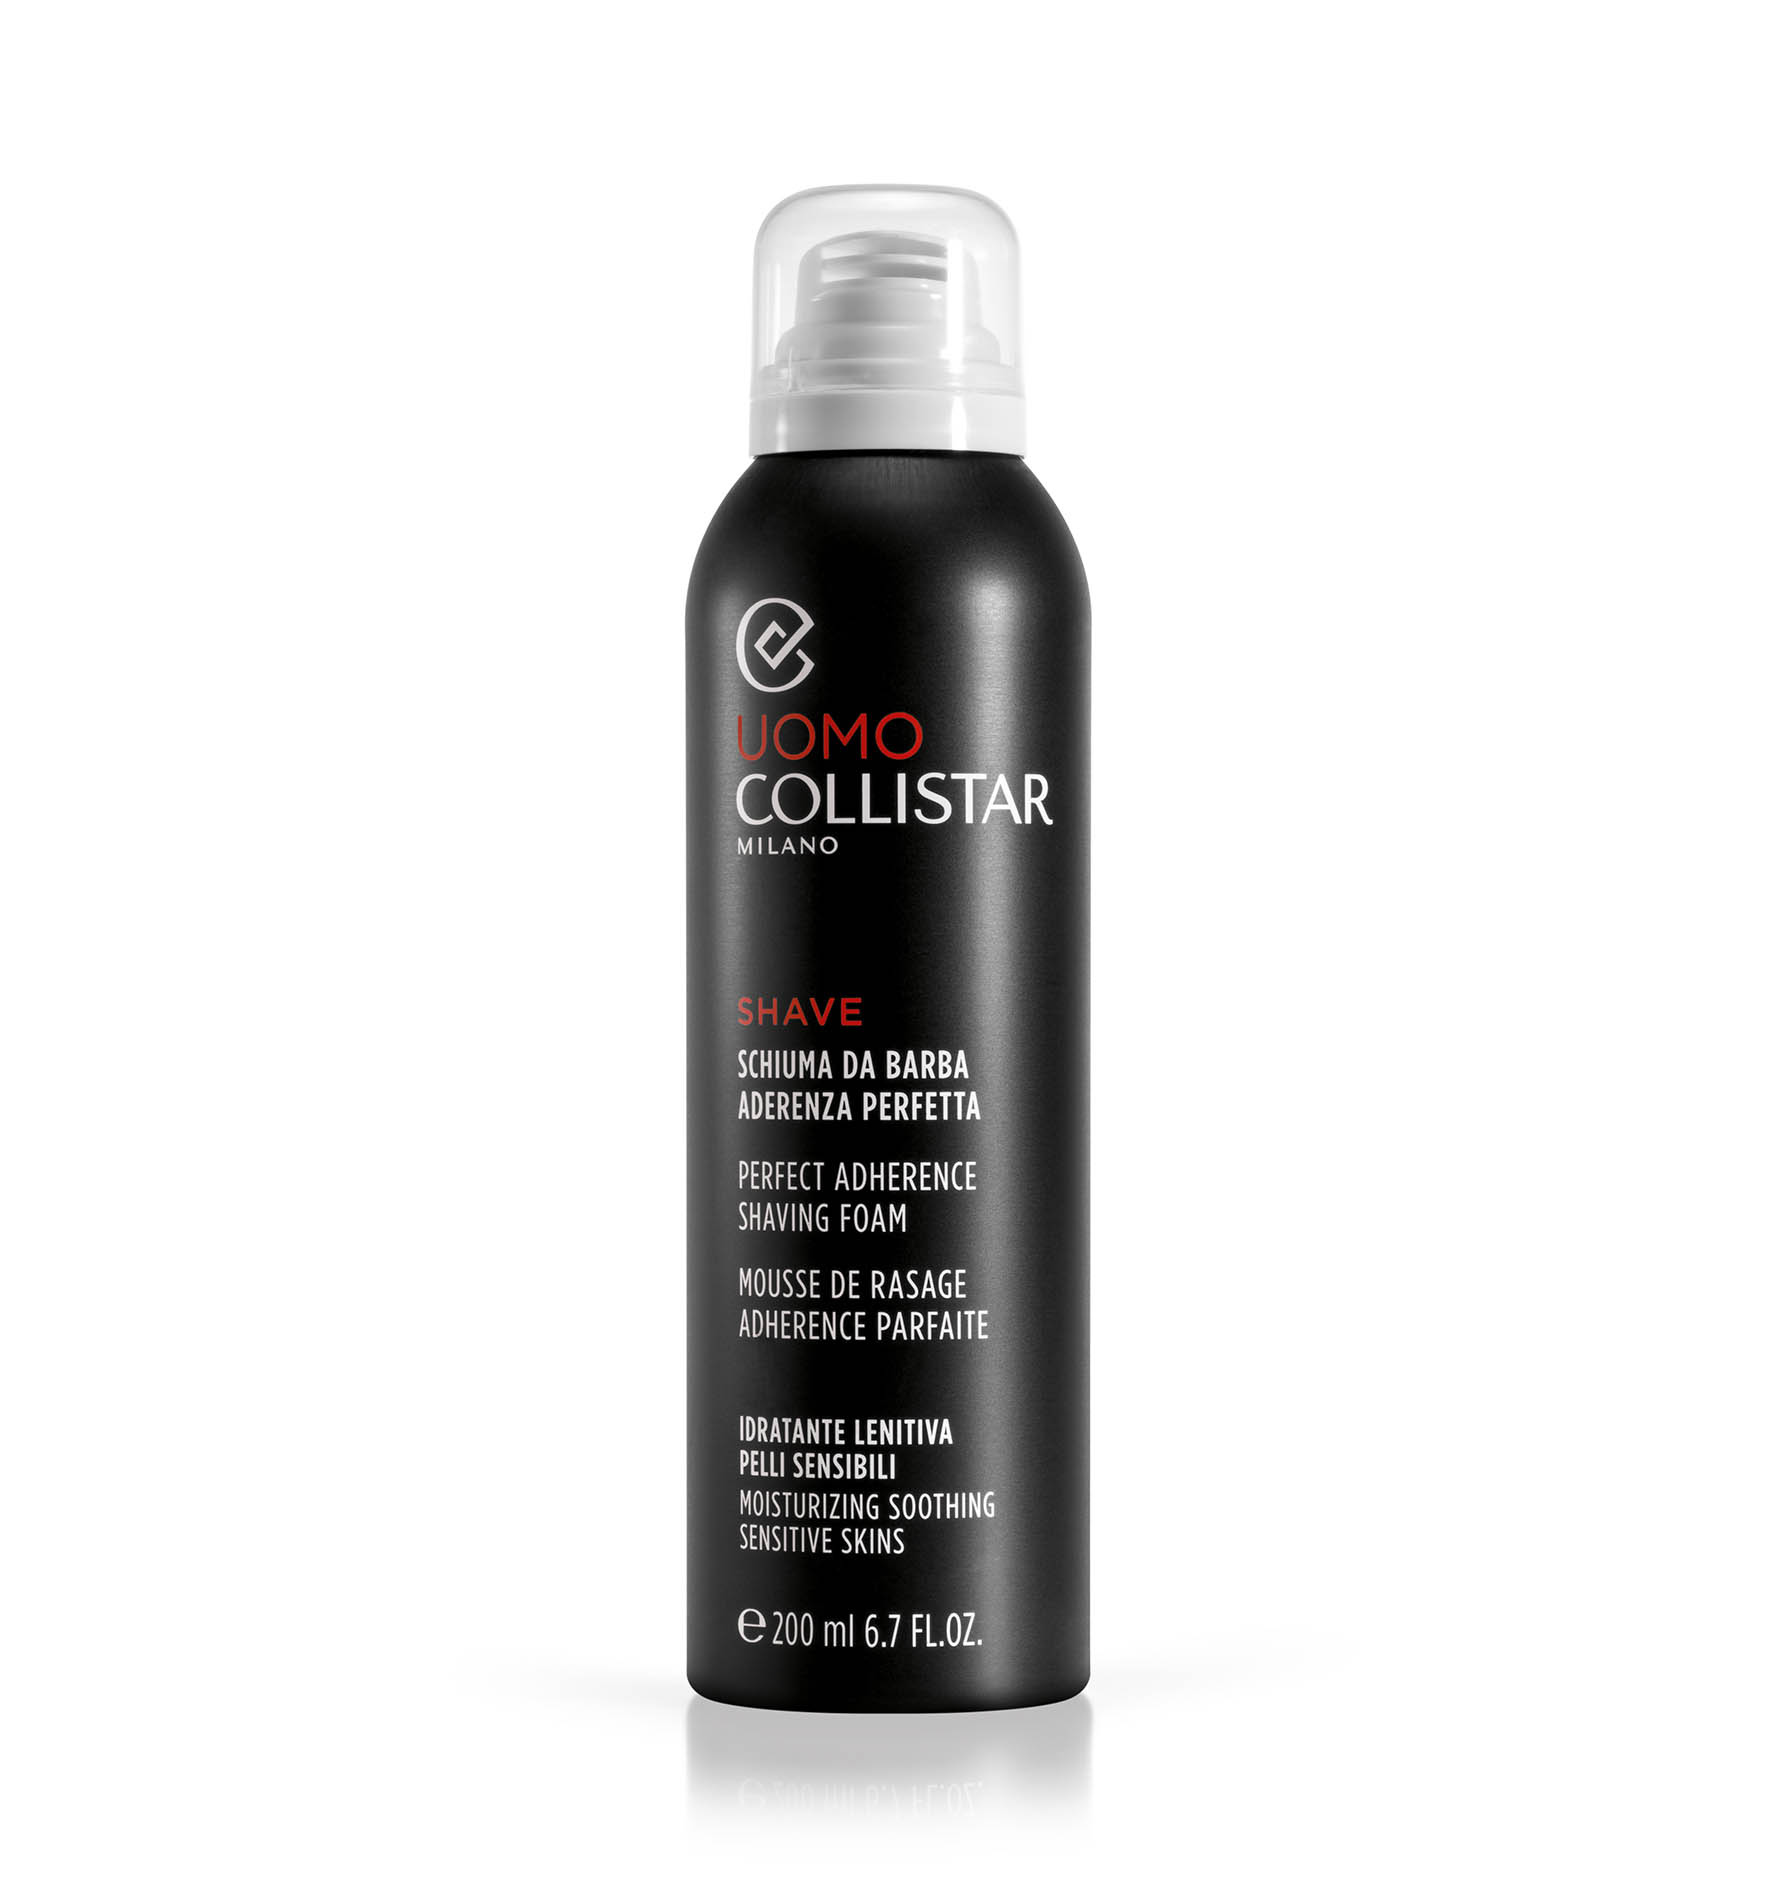 PERFECT ADHERENCE SHAVING FOAM - SOLUTIONS FOR | Collistar - Shop Online Ufficiale